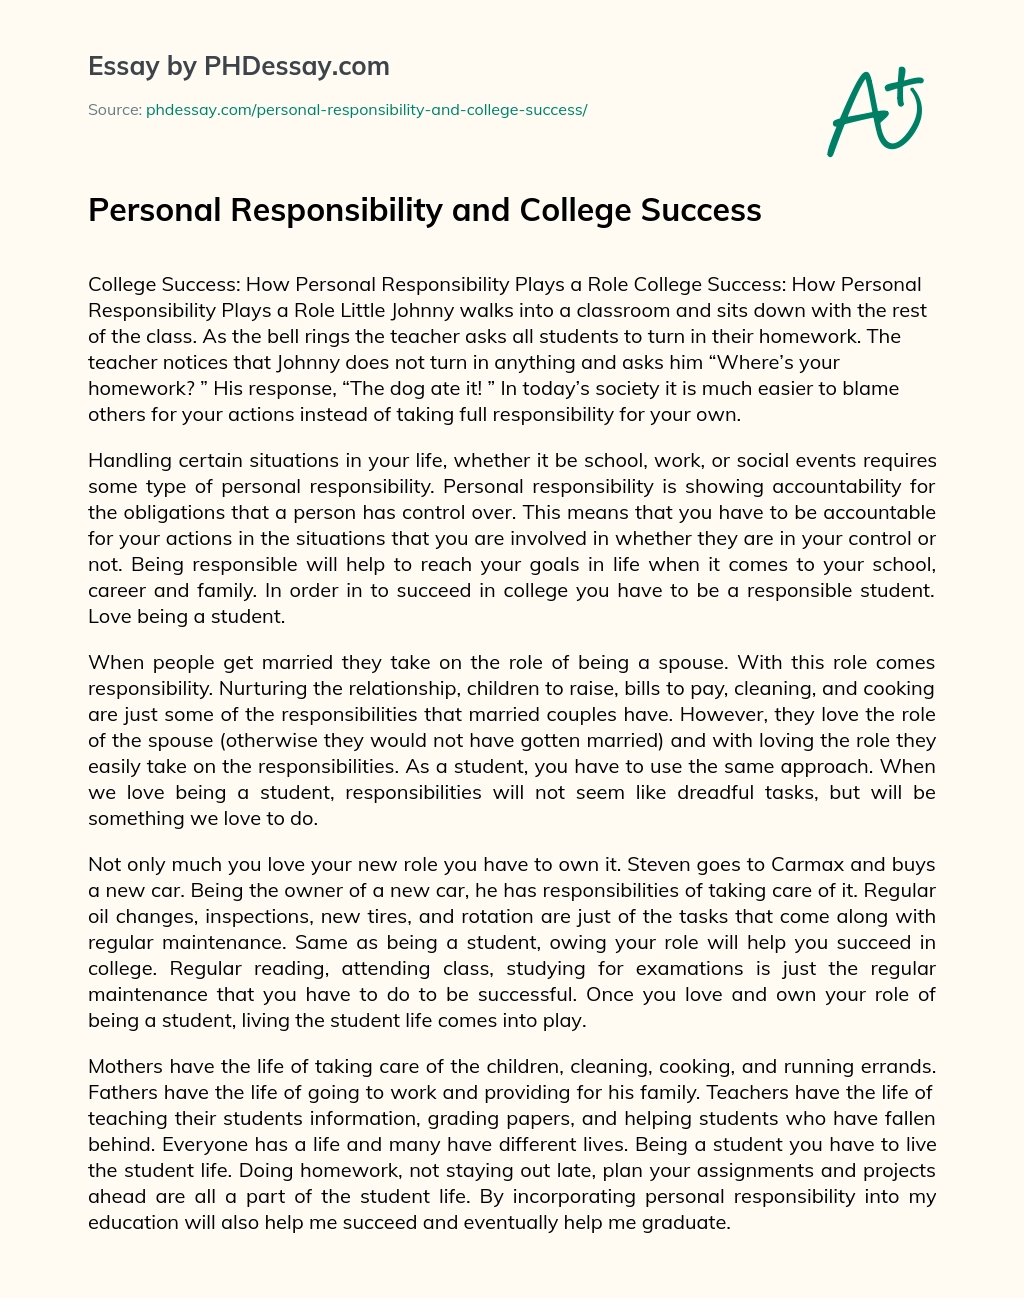 Personal Responsibility and College Success essay